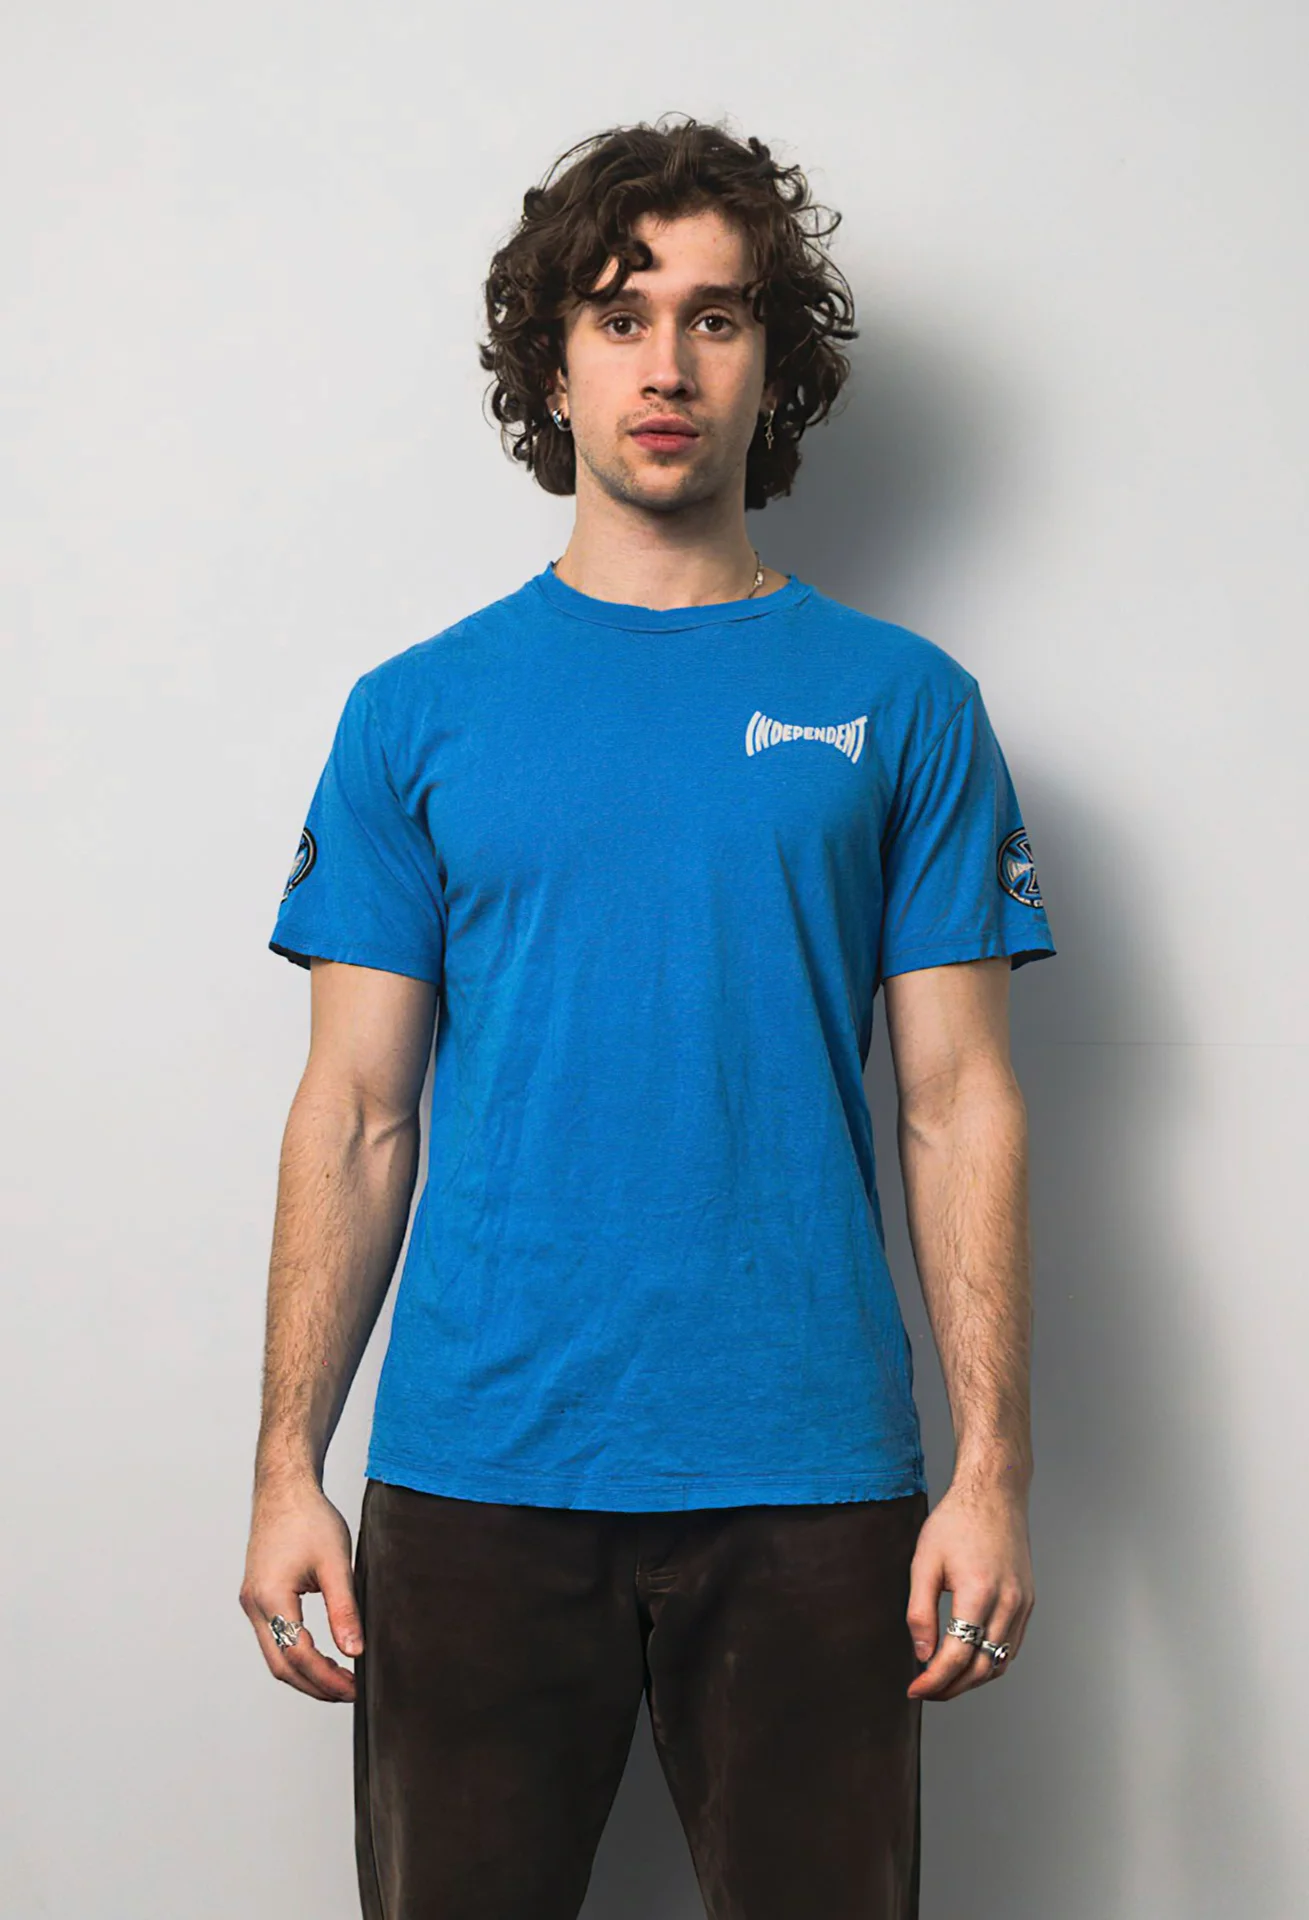 Independent - Blue Tee with print (M)